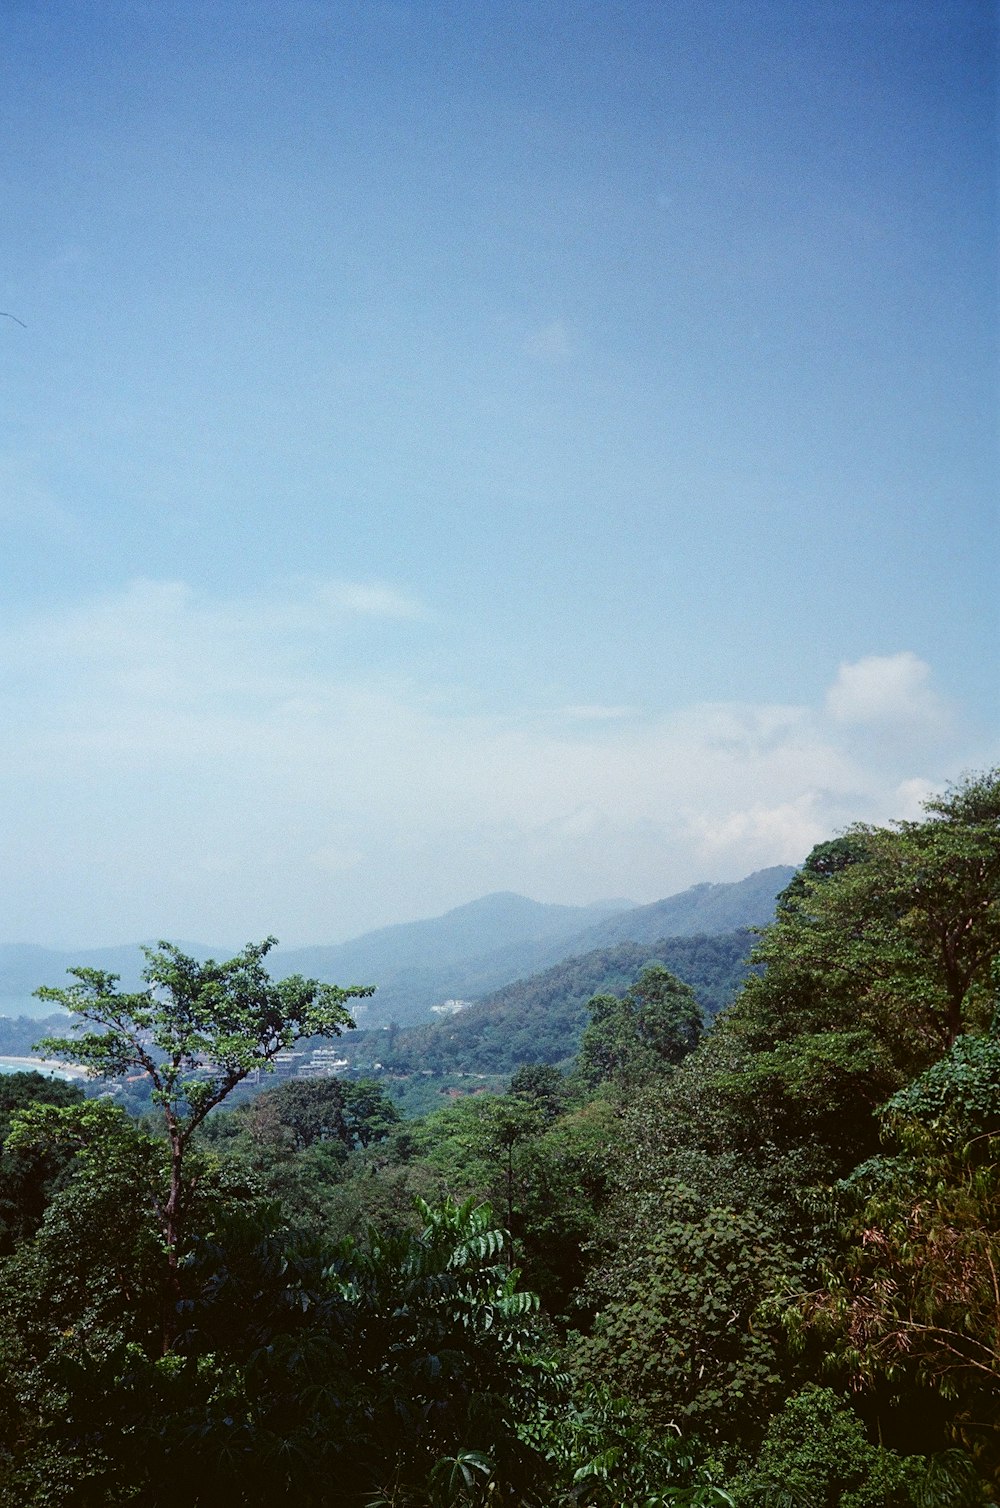 a view of the mountains and trees from a hill